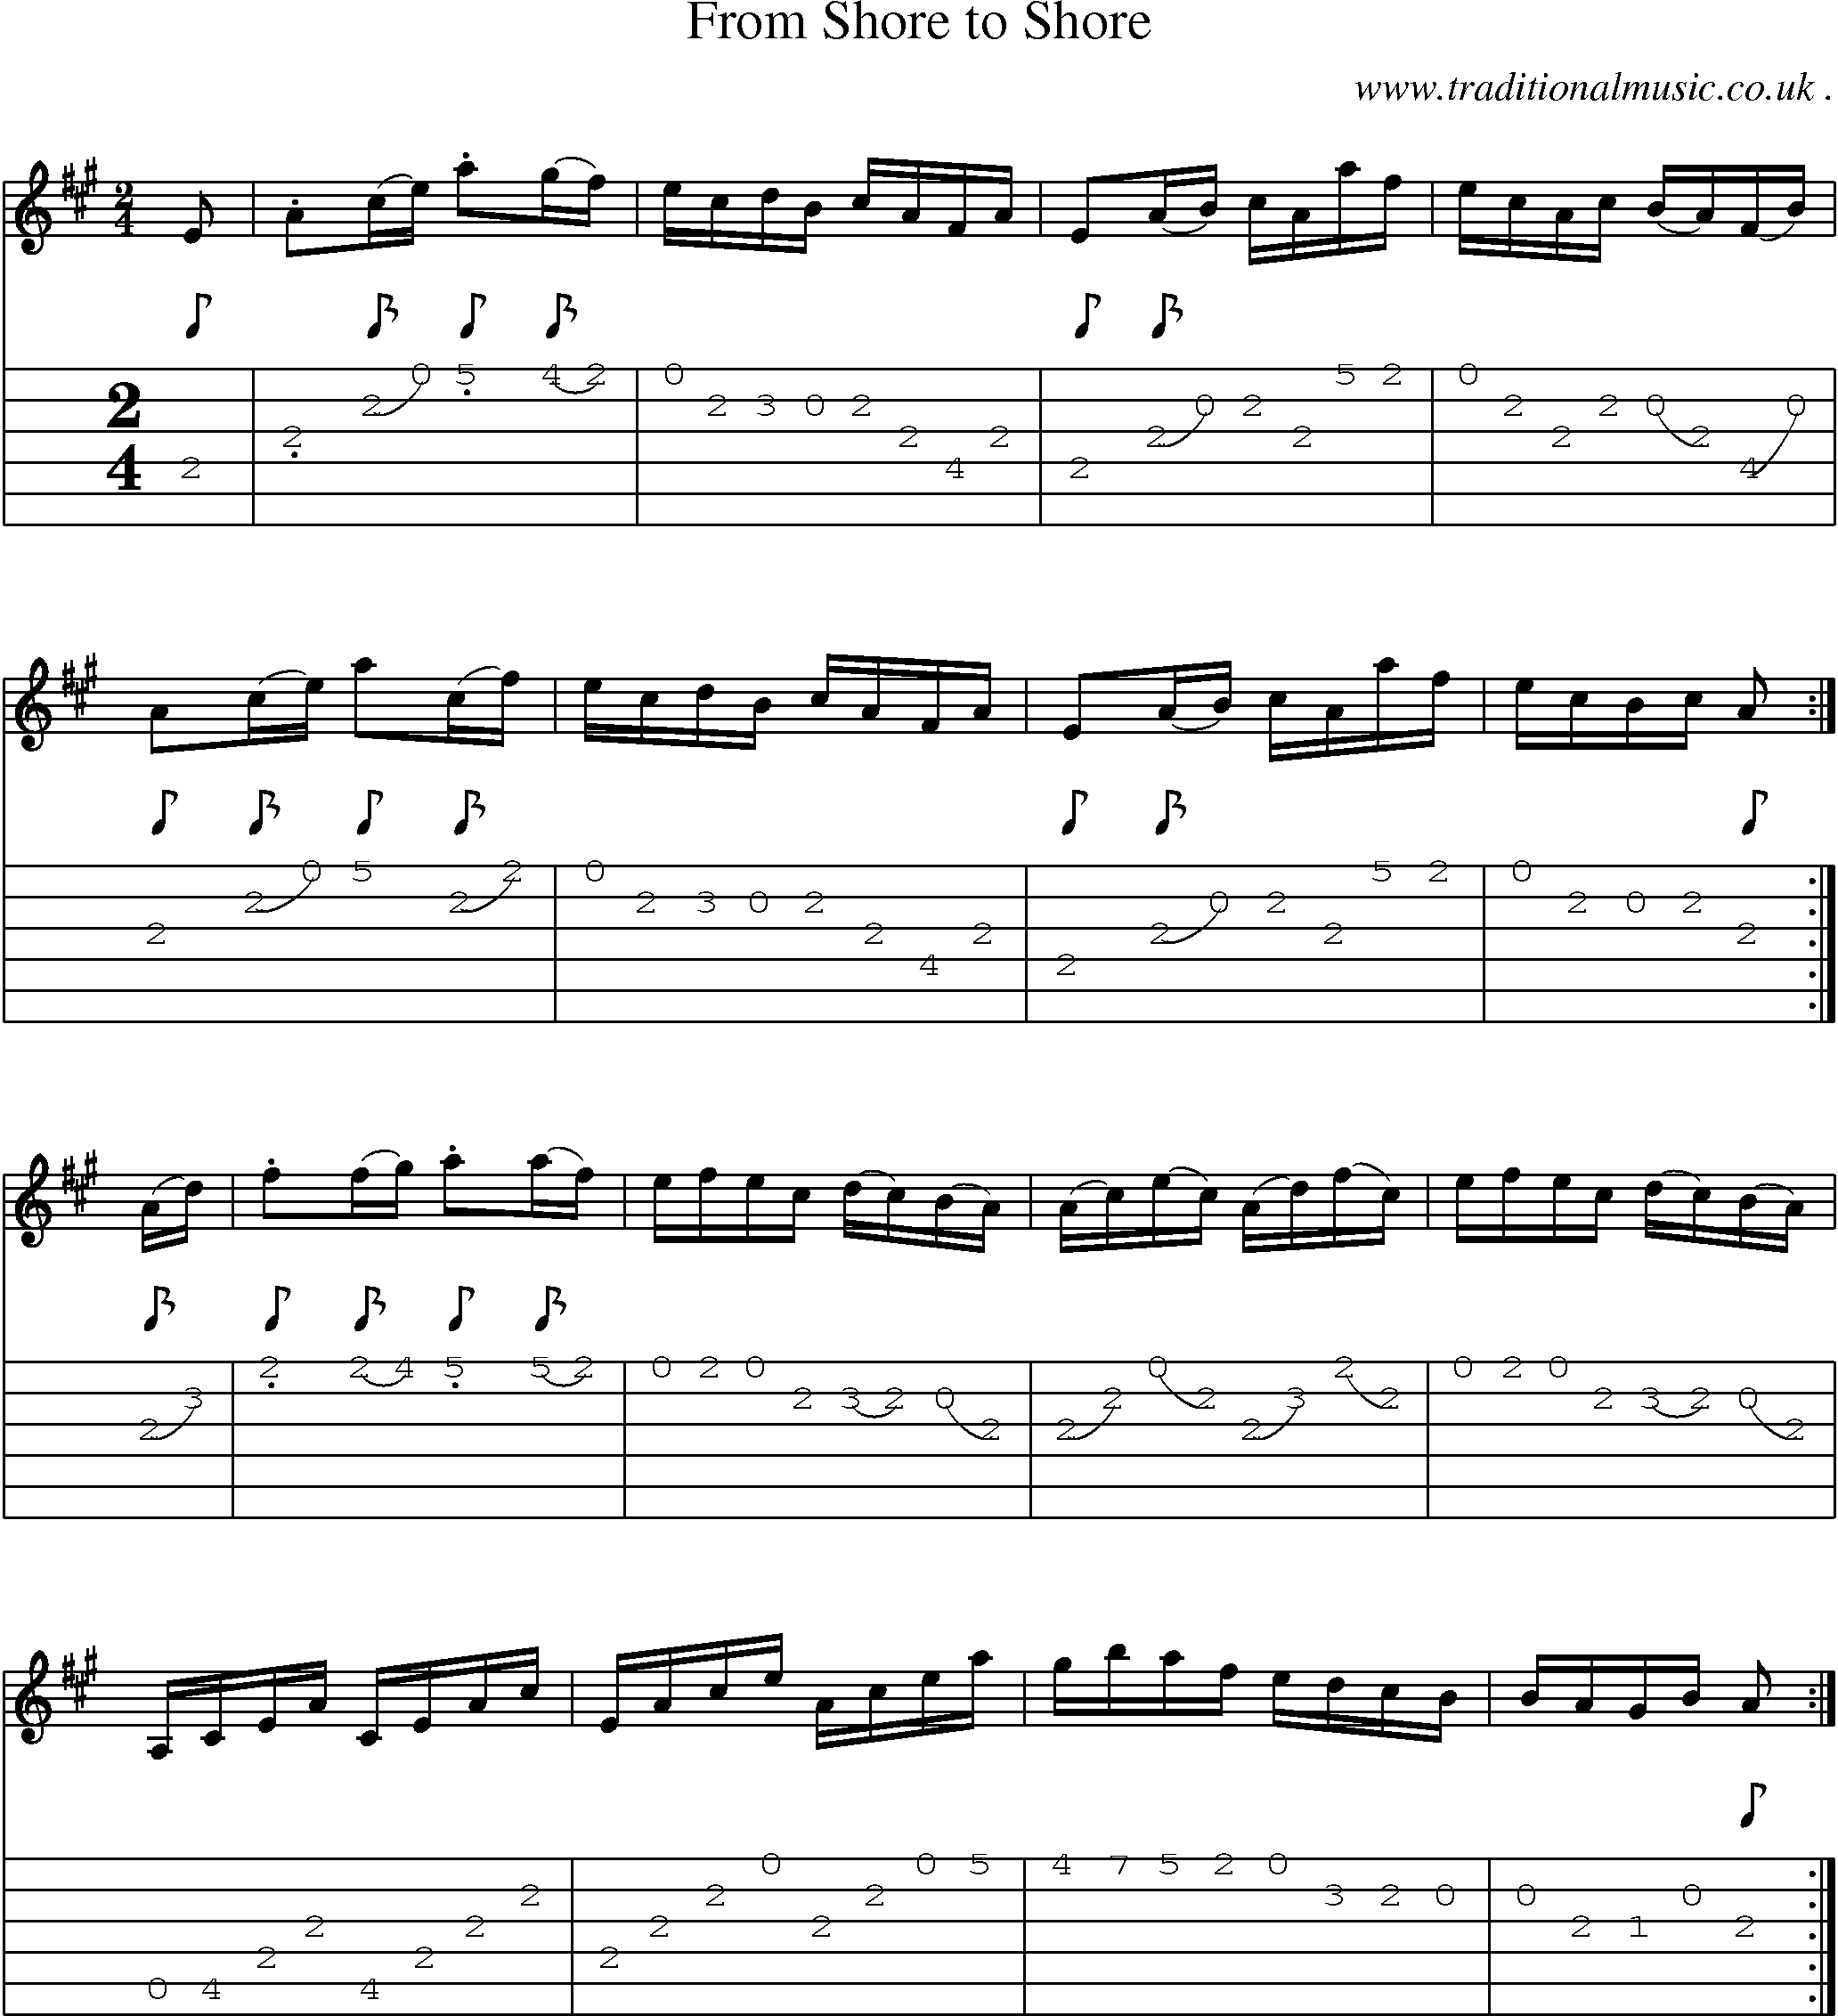 Sheet-Music and Guitar Tabs for From Shore To Shore